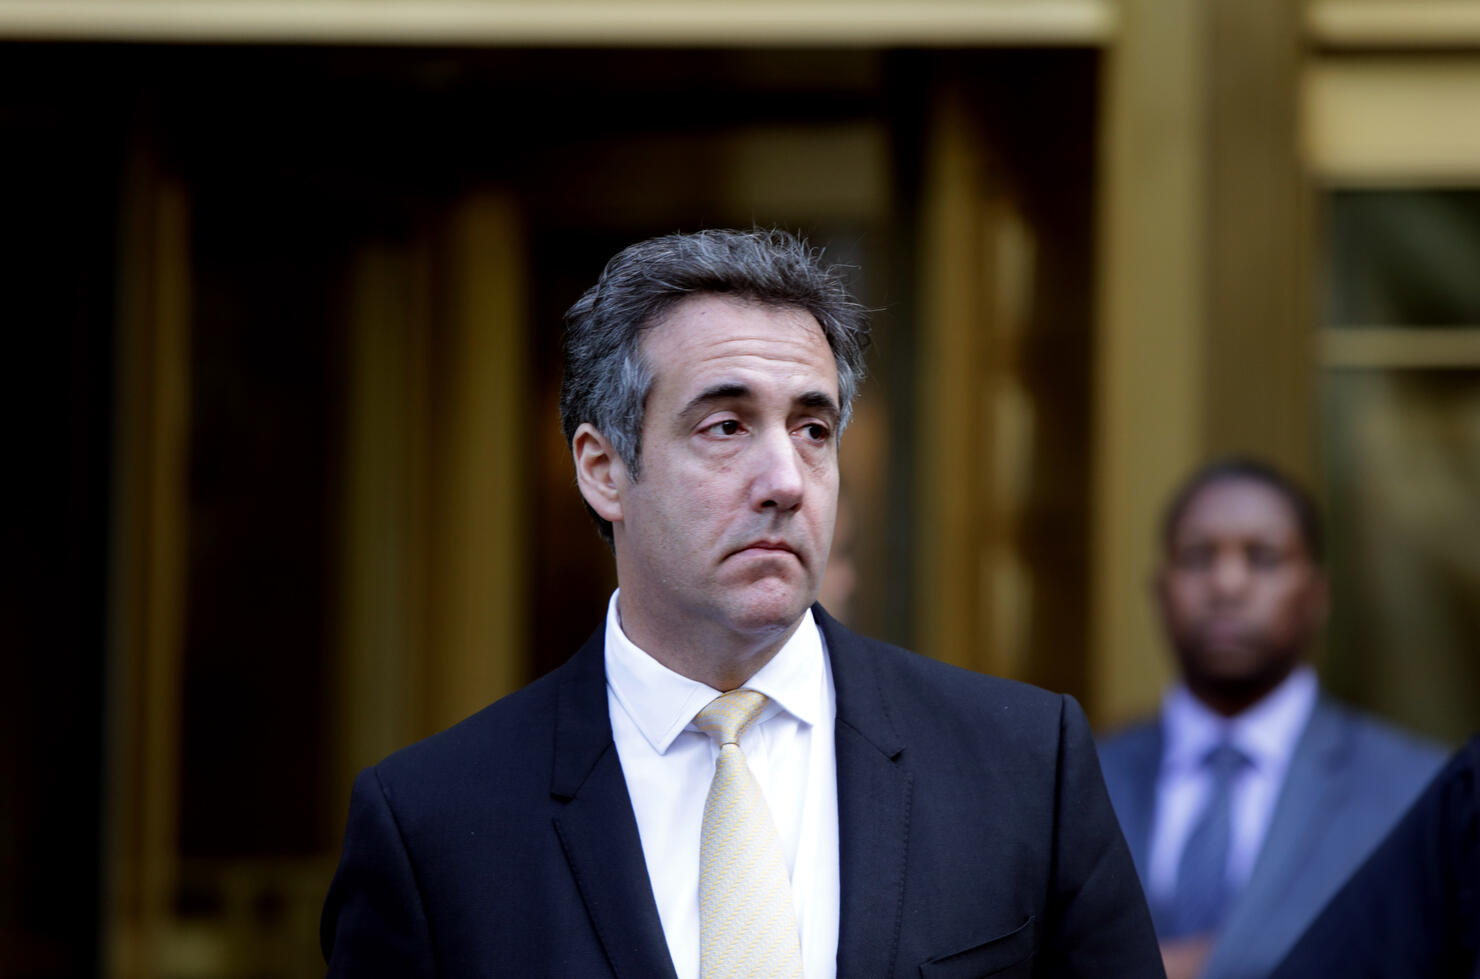 President Trump Directed His Attorney Michael Cohen To Lie To Congress About The Moscow Tower Project